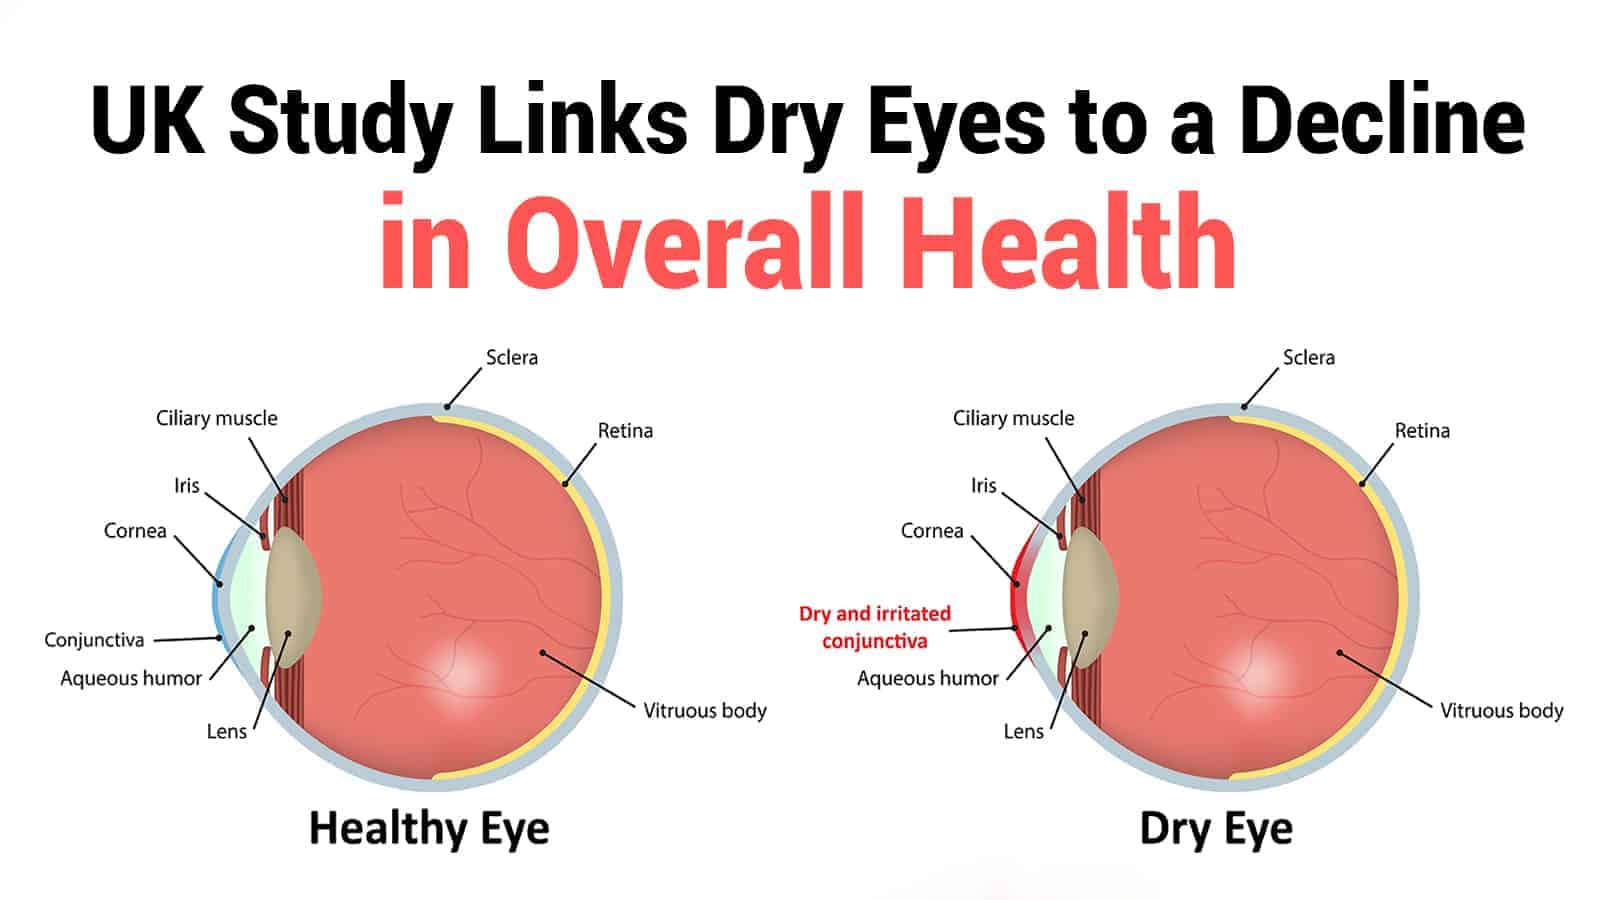 UK Study Links Dry Eyes to a Decline in Overall Health